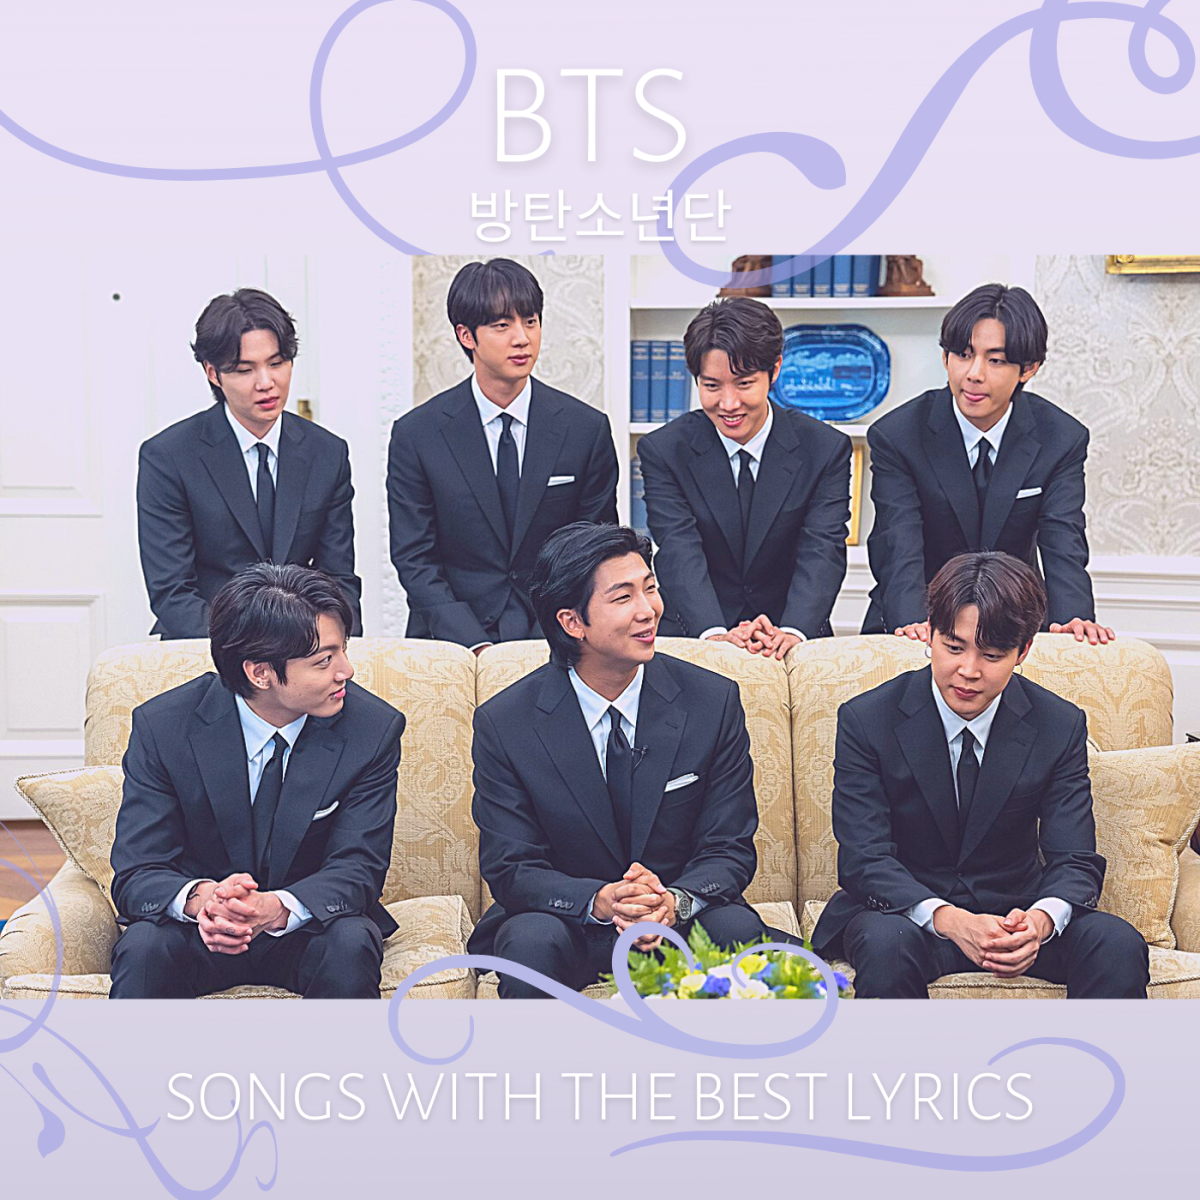 Did your favorite BTS song make the list?